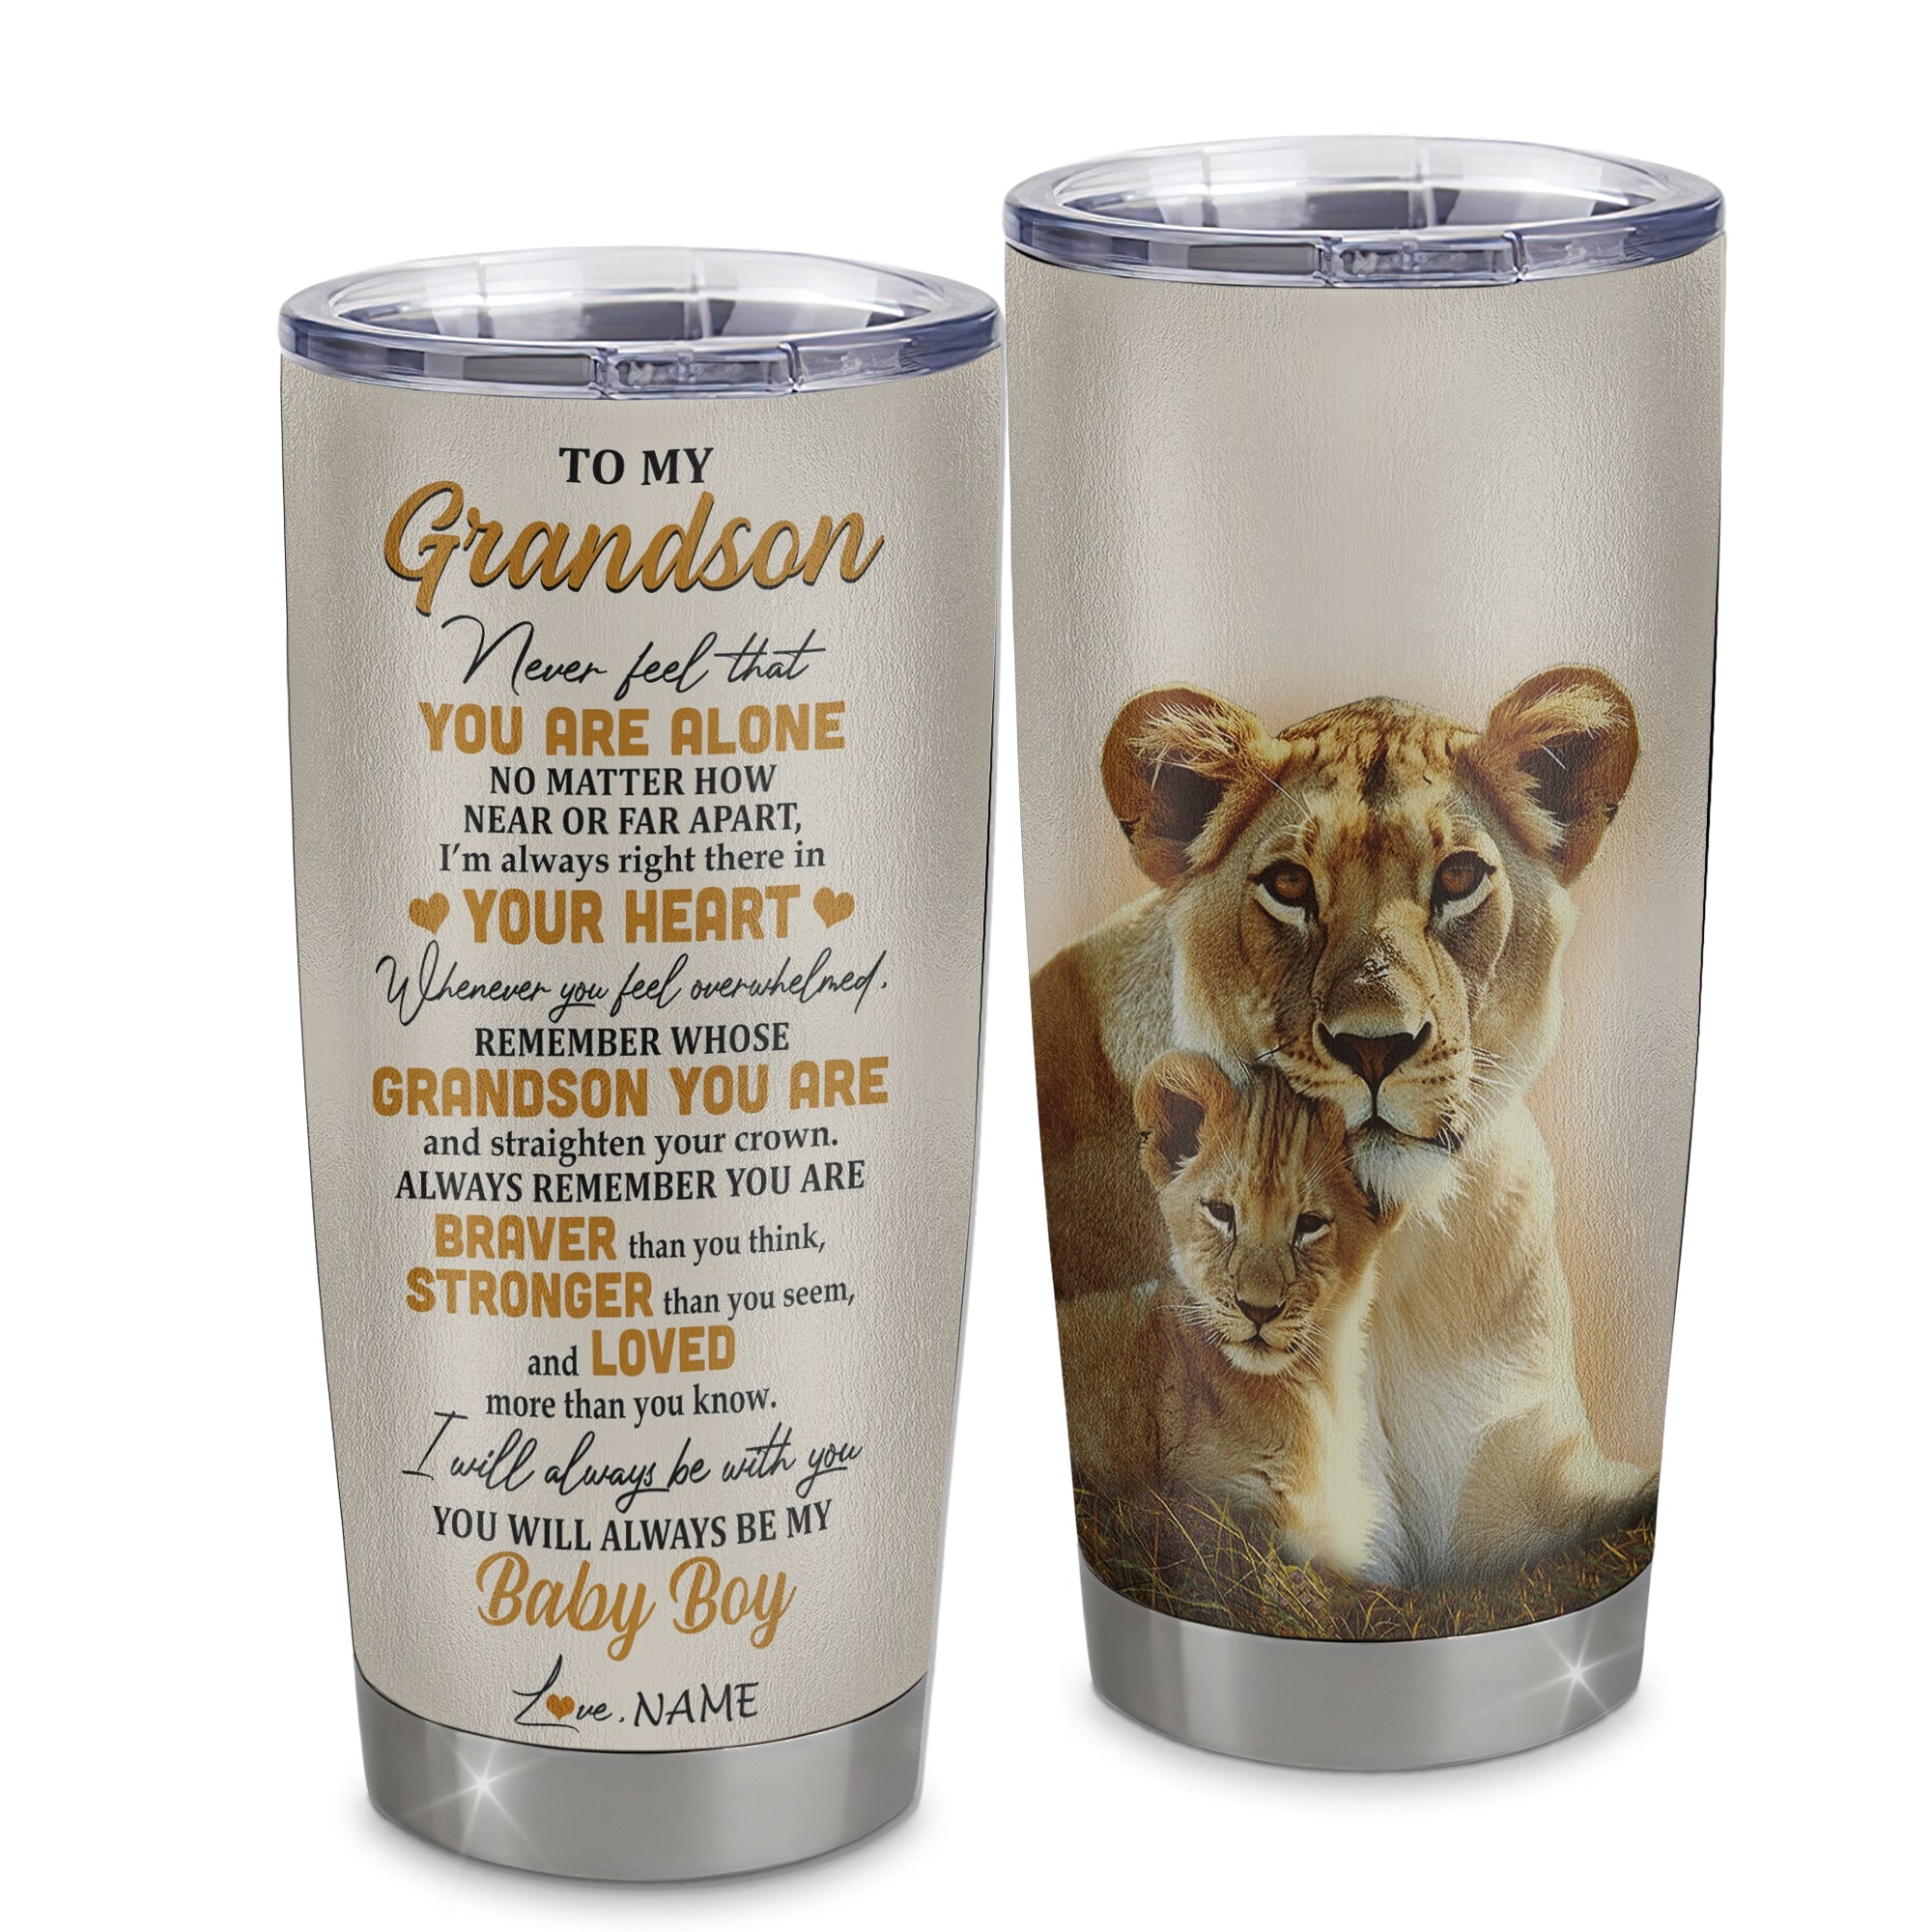 Personalized_To_My_Grandson_Tumbler_From_Grandma_Nana_Stainless_Steel_Cup_Lion_Never_Feel_That_You_Are_Alone_Great_Grandson_Birthday_Christmas_Travel_Mug_Tumbler_mockup_1.jpg